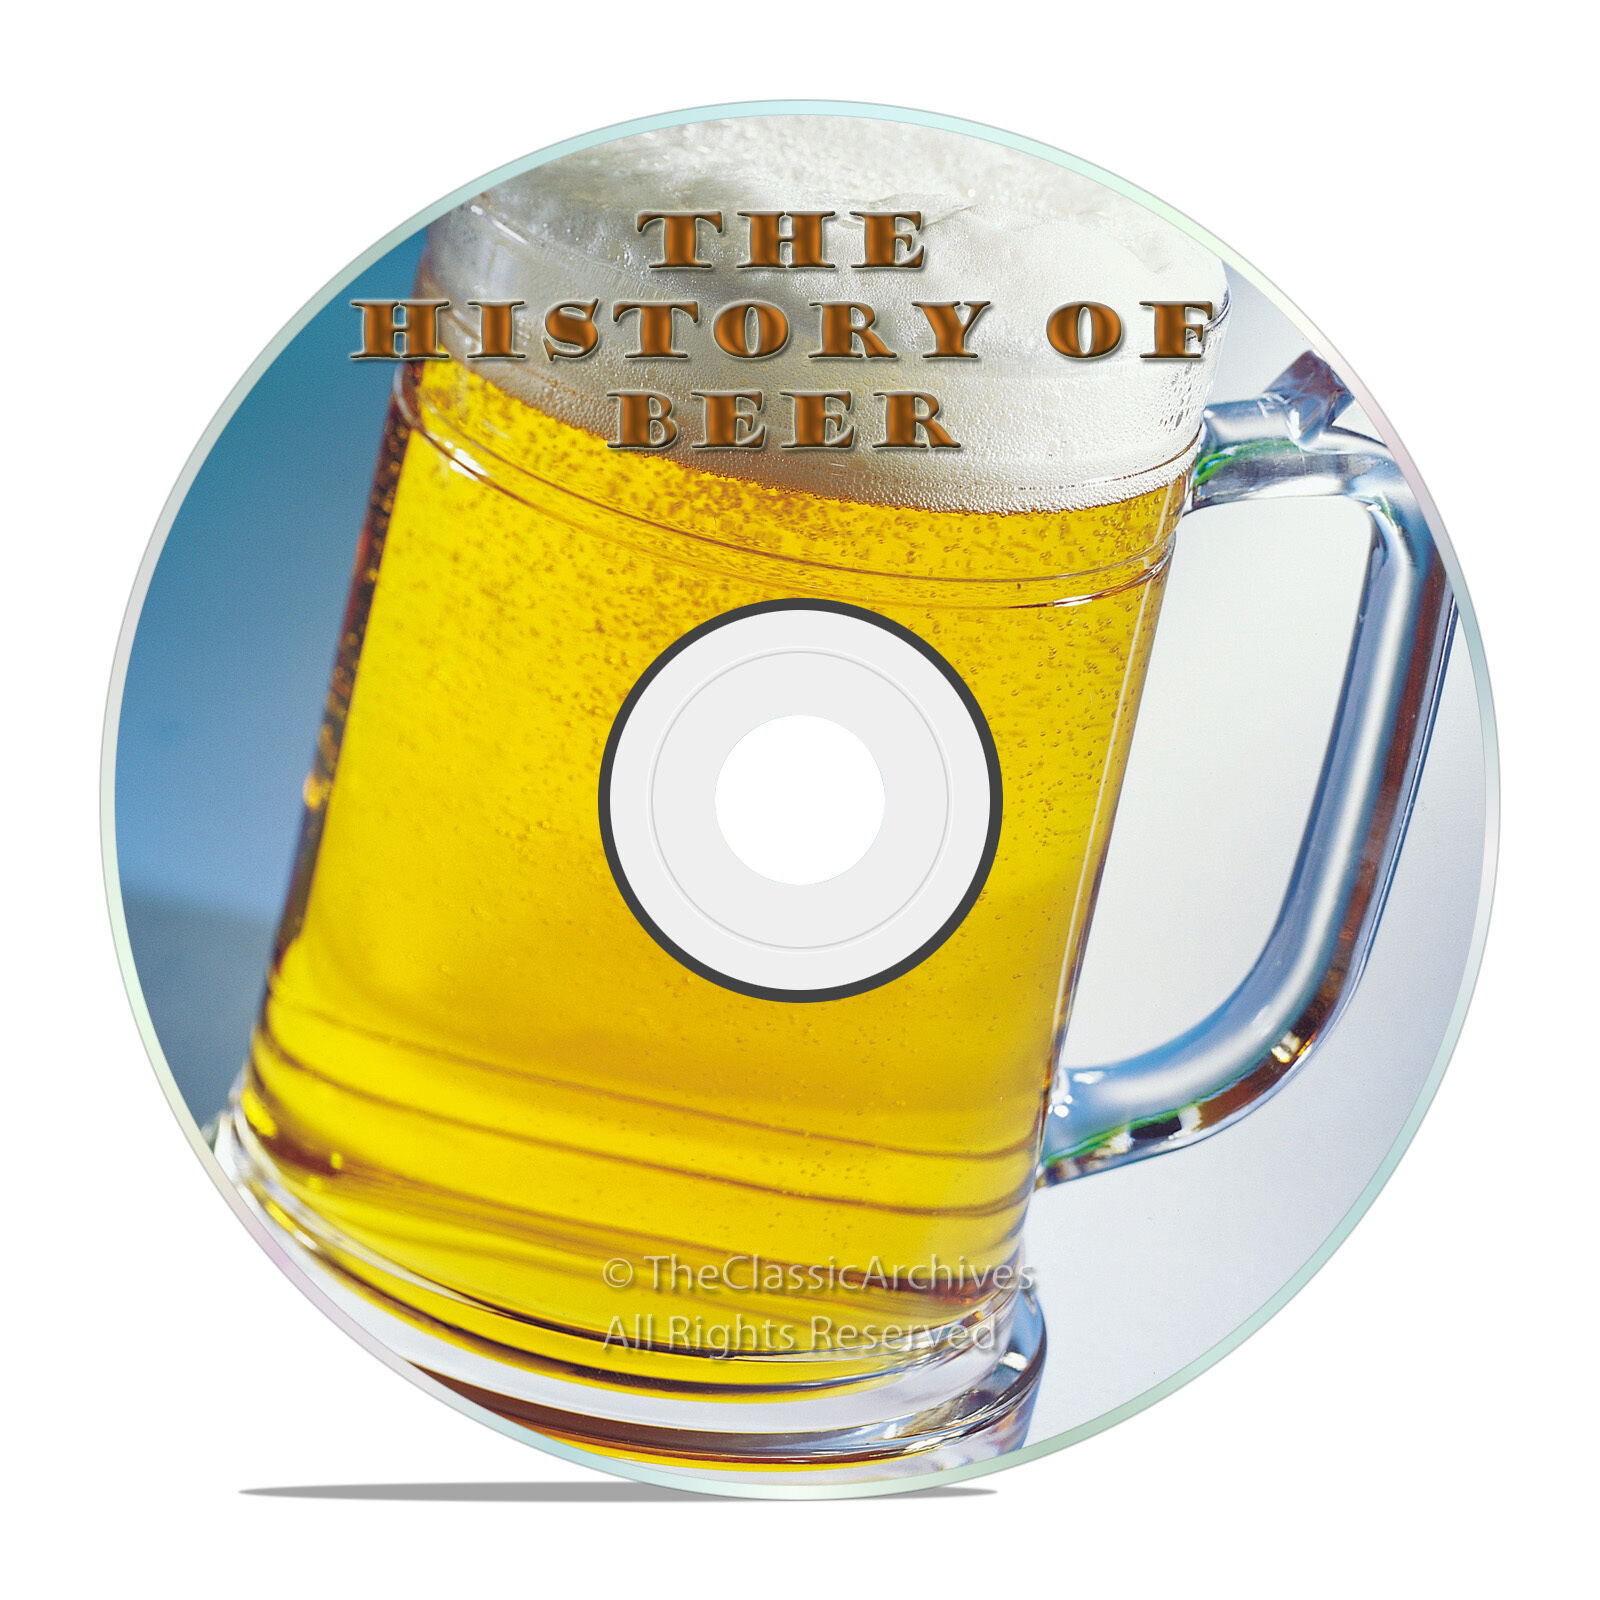 THE HISTORY OF BEER, BREWING, ALCOHOL ADVERTISING, AMERICAN ALCOHOL - J49